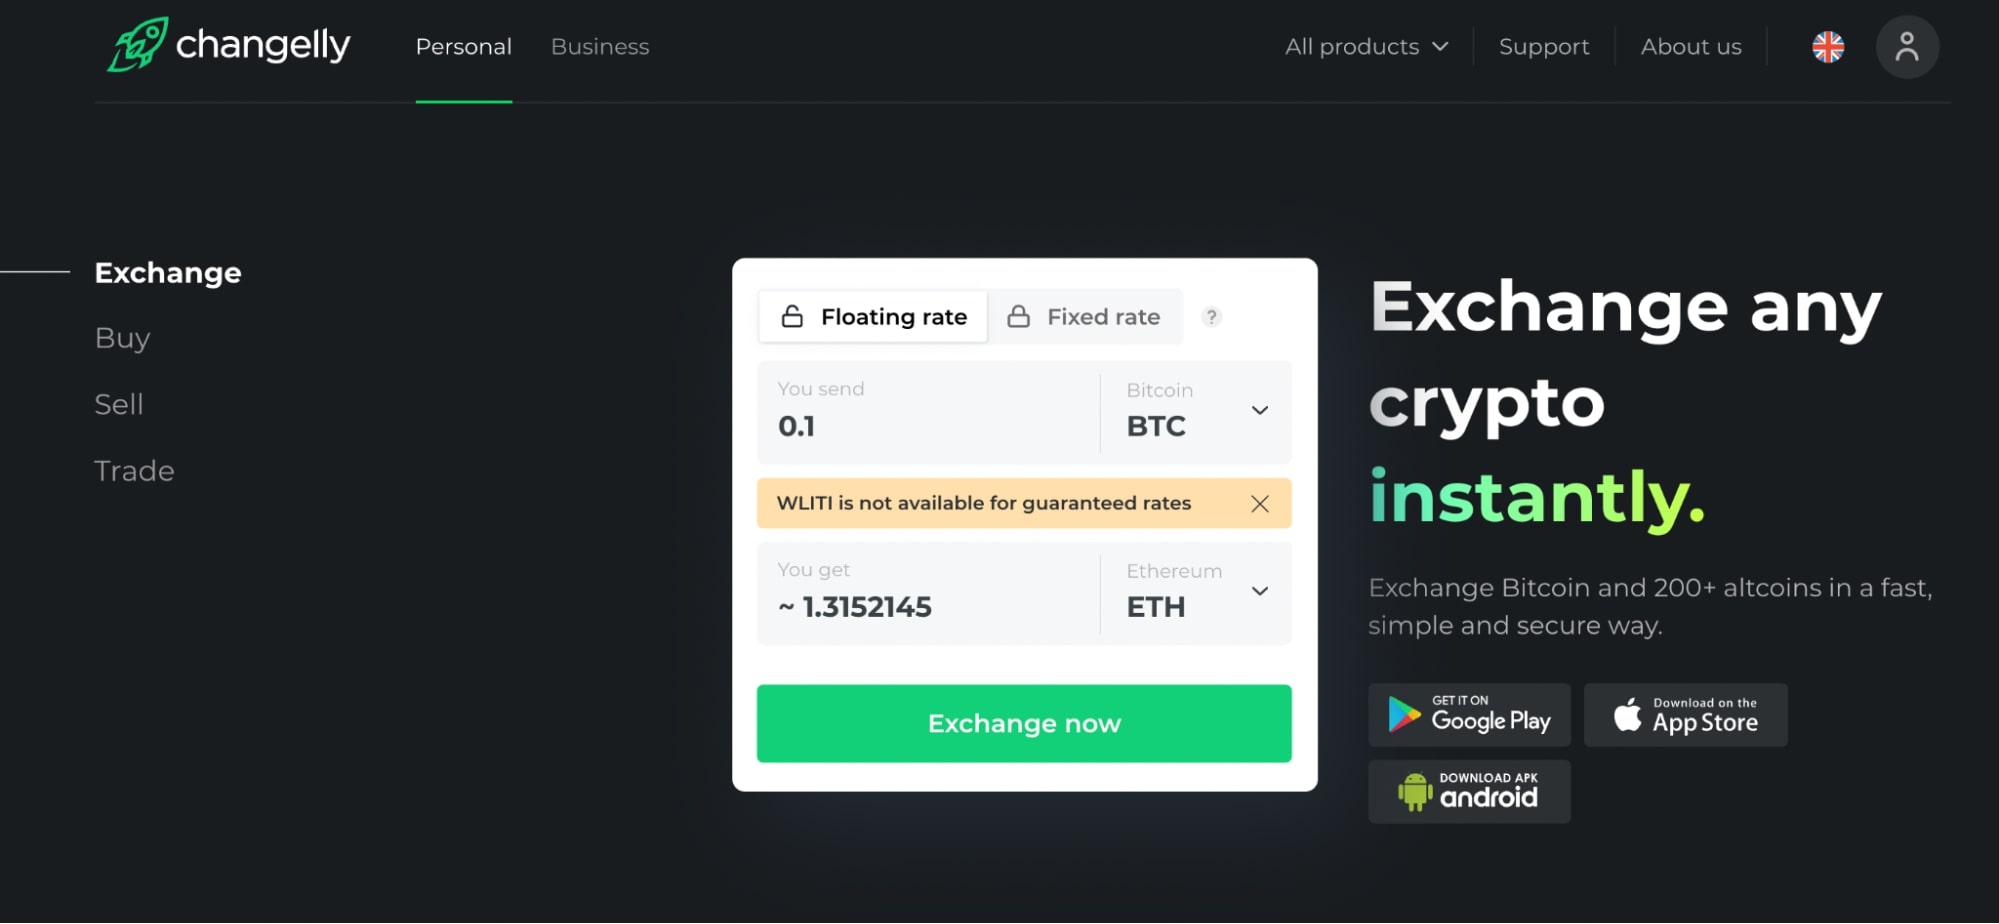 Changelly homepage